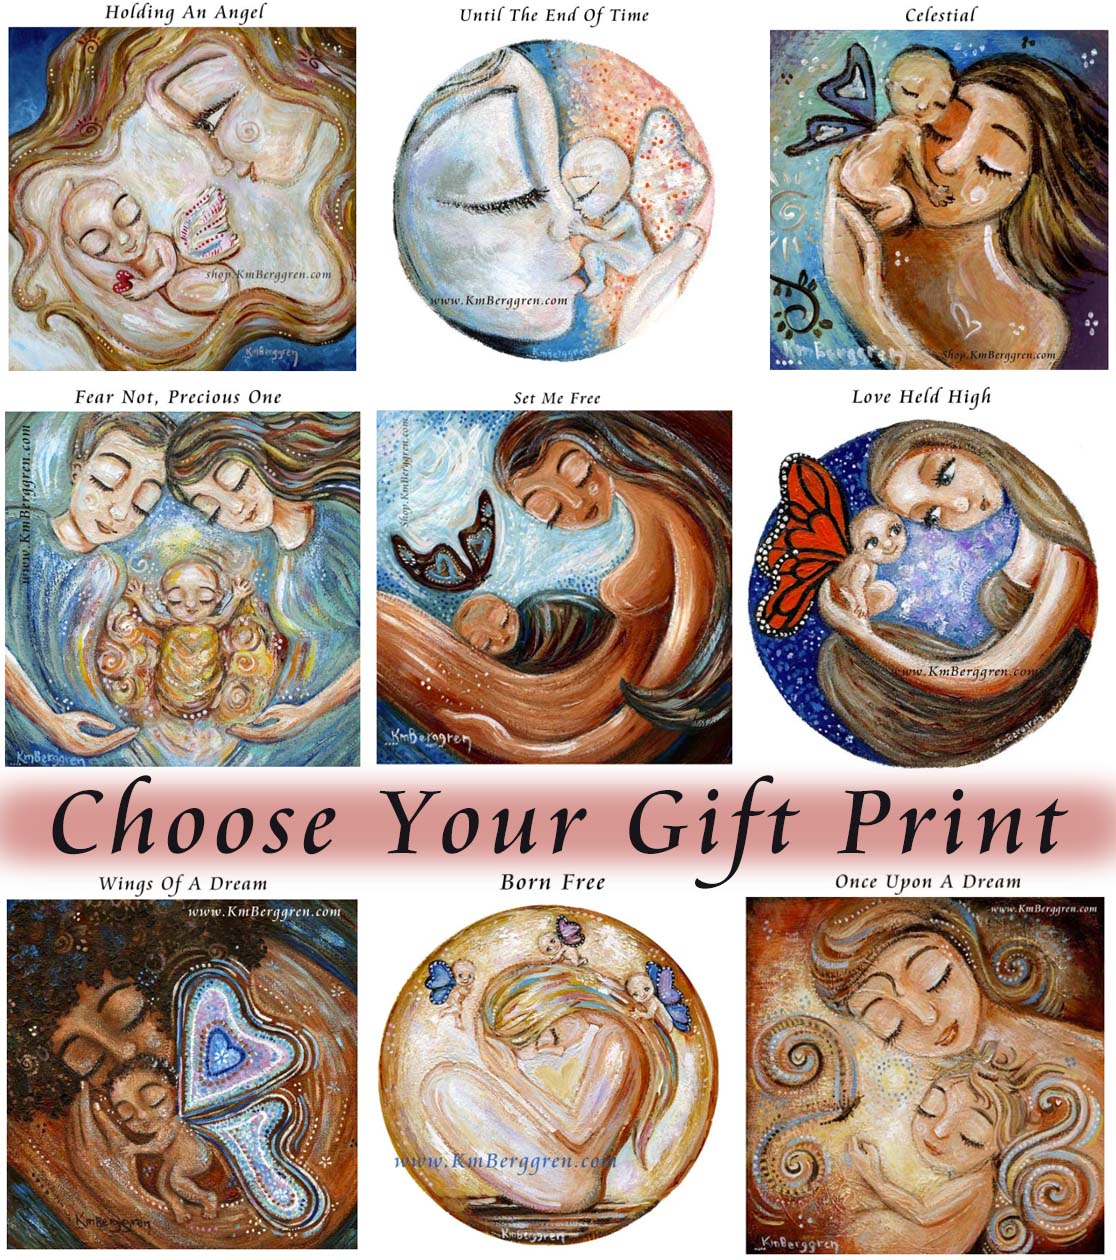 angel art prints, mom and baby angel artwork, heartfelt storybook of a mother finding hope and love after losing a child